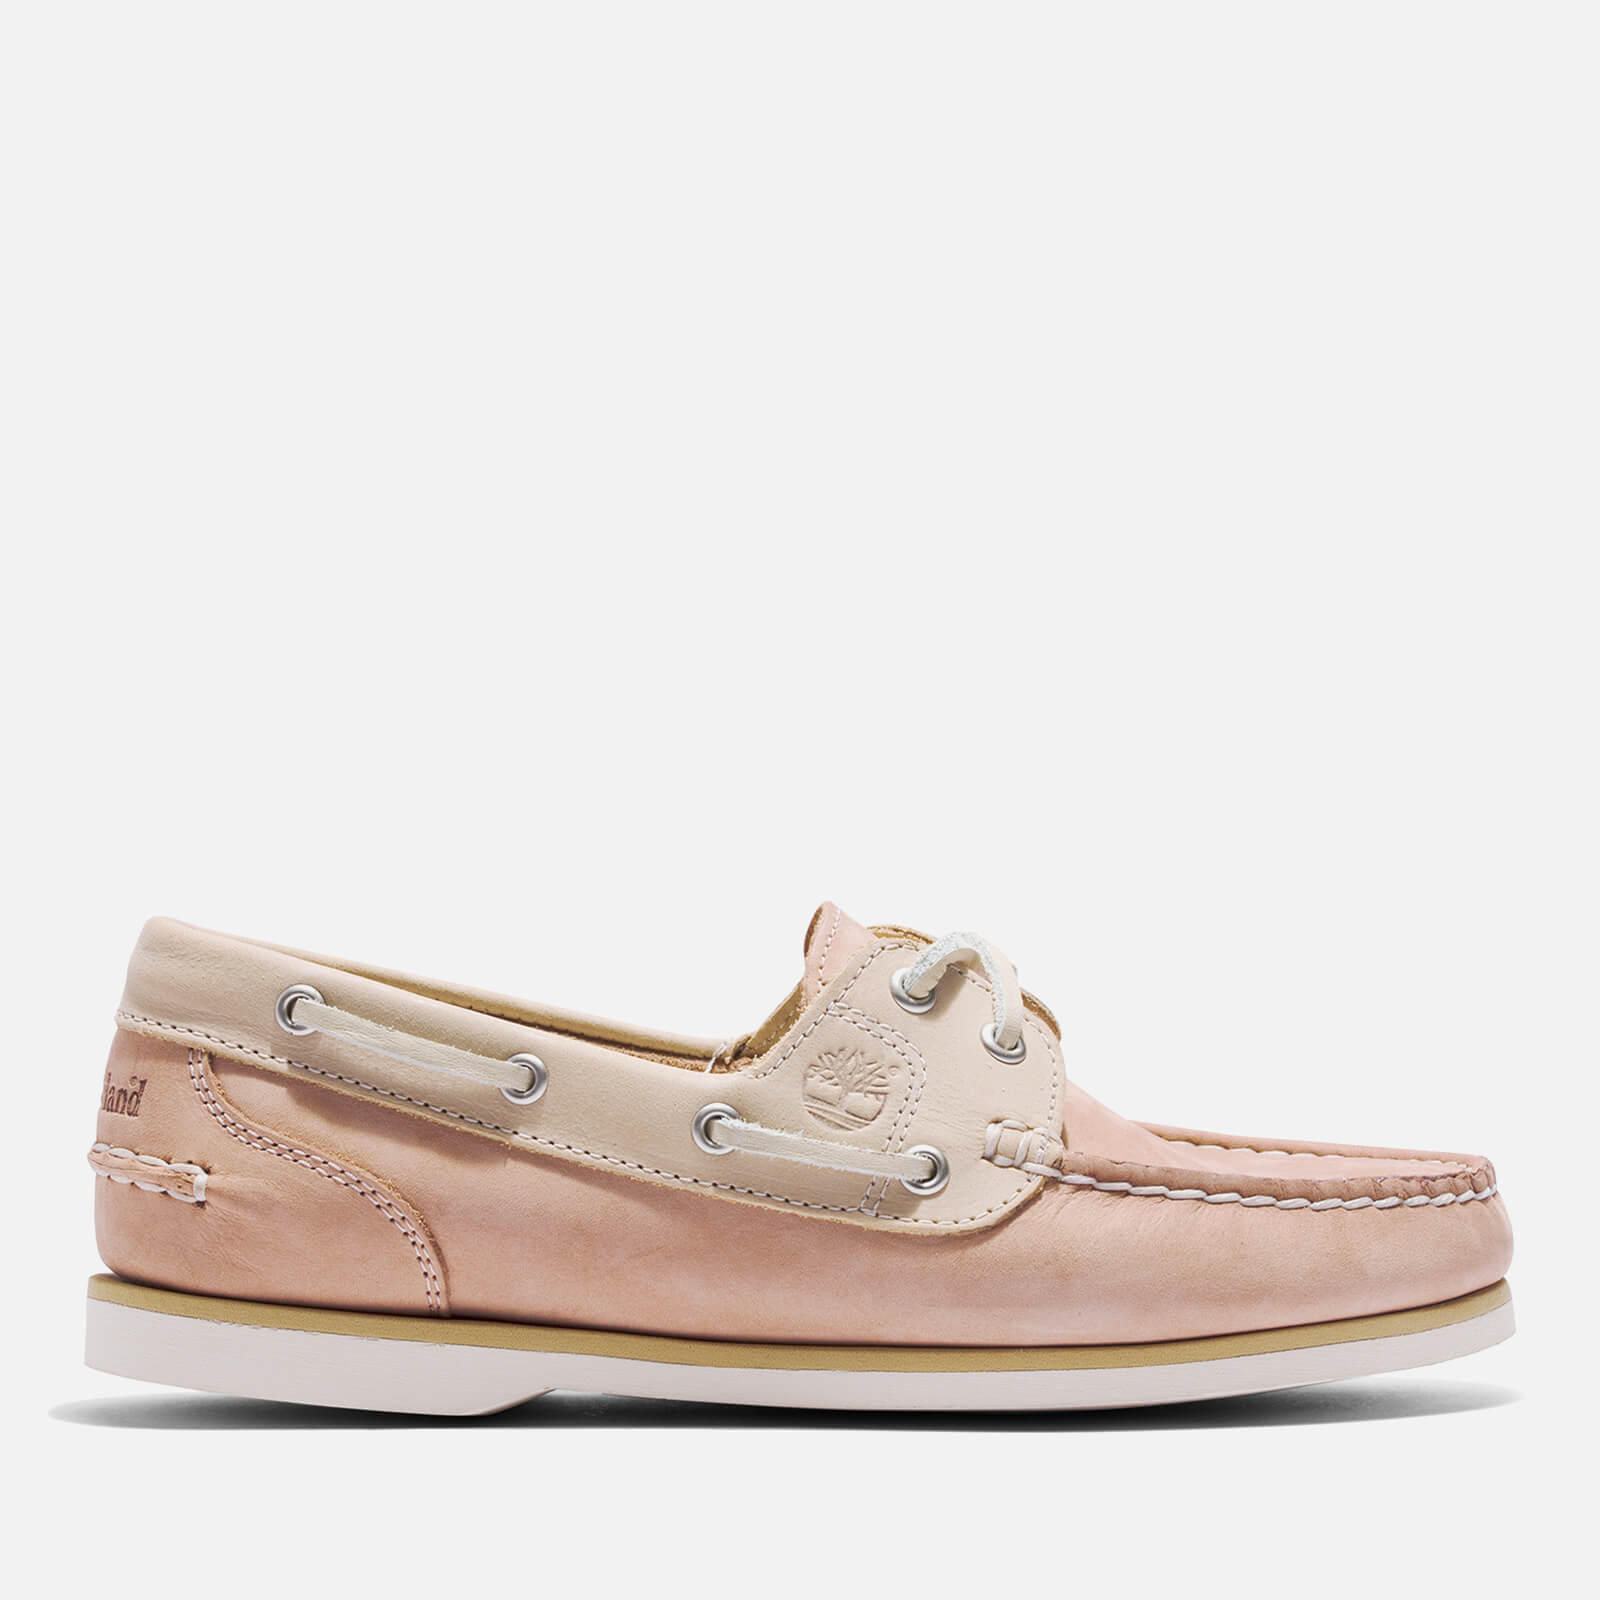 Timberland Classic Boat 2-eye Boat Shoes In Leather